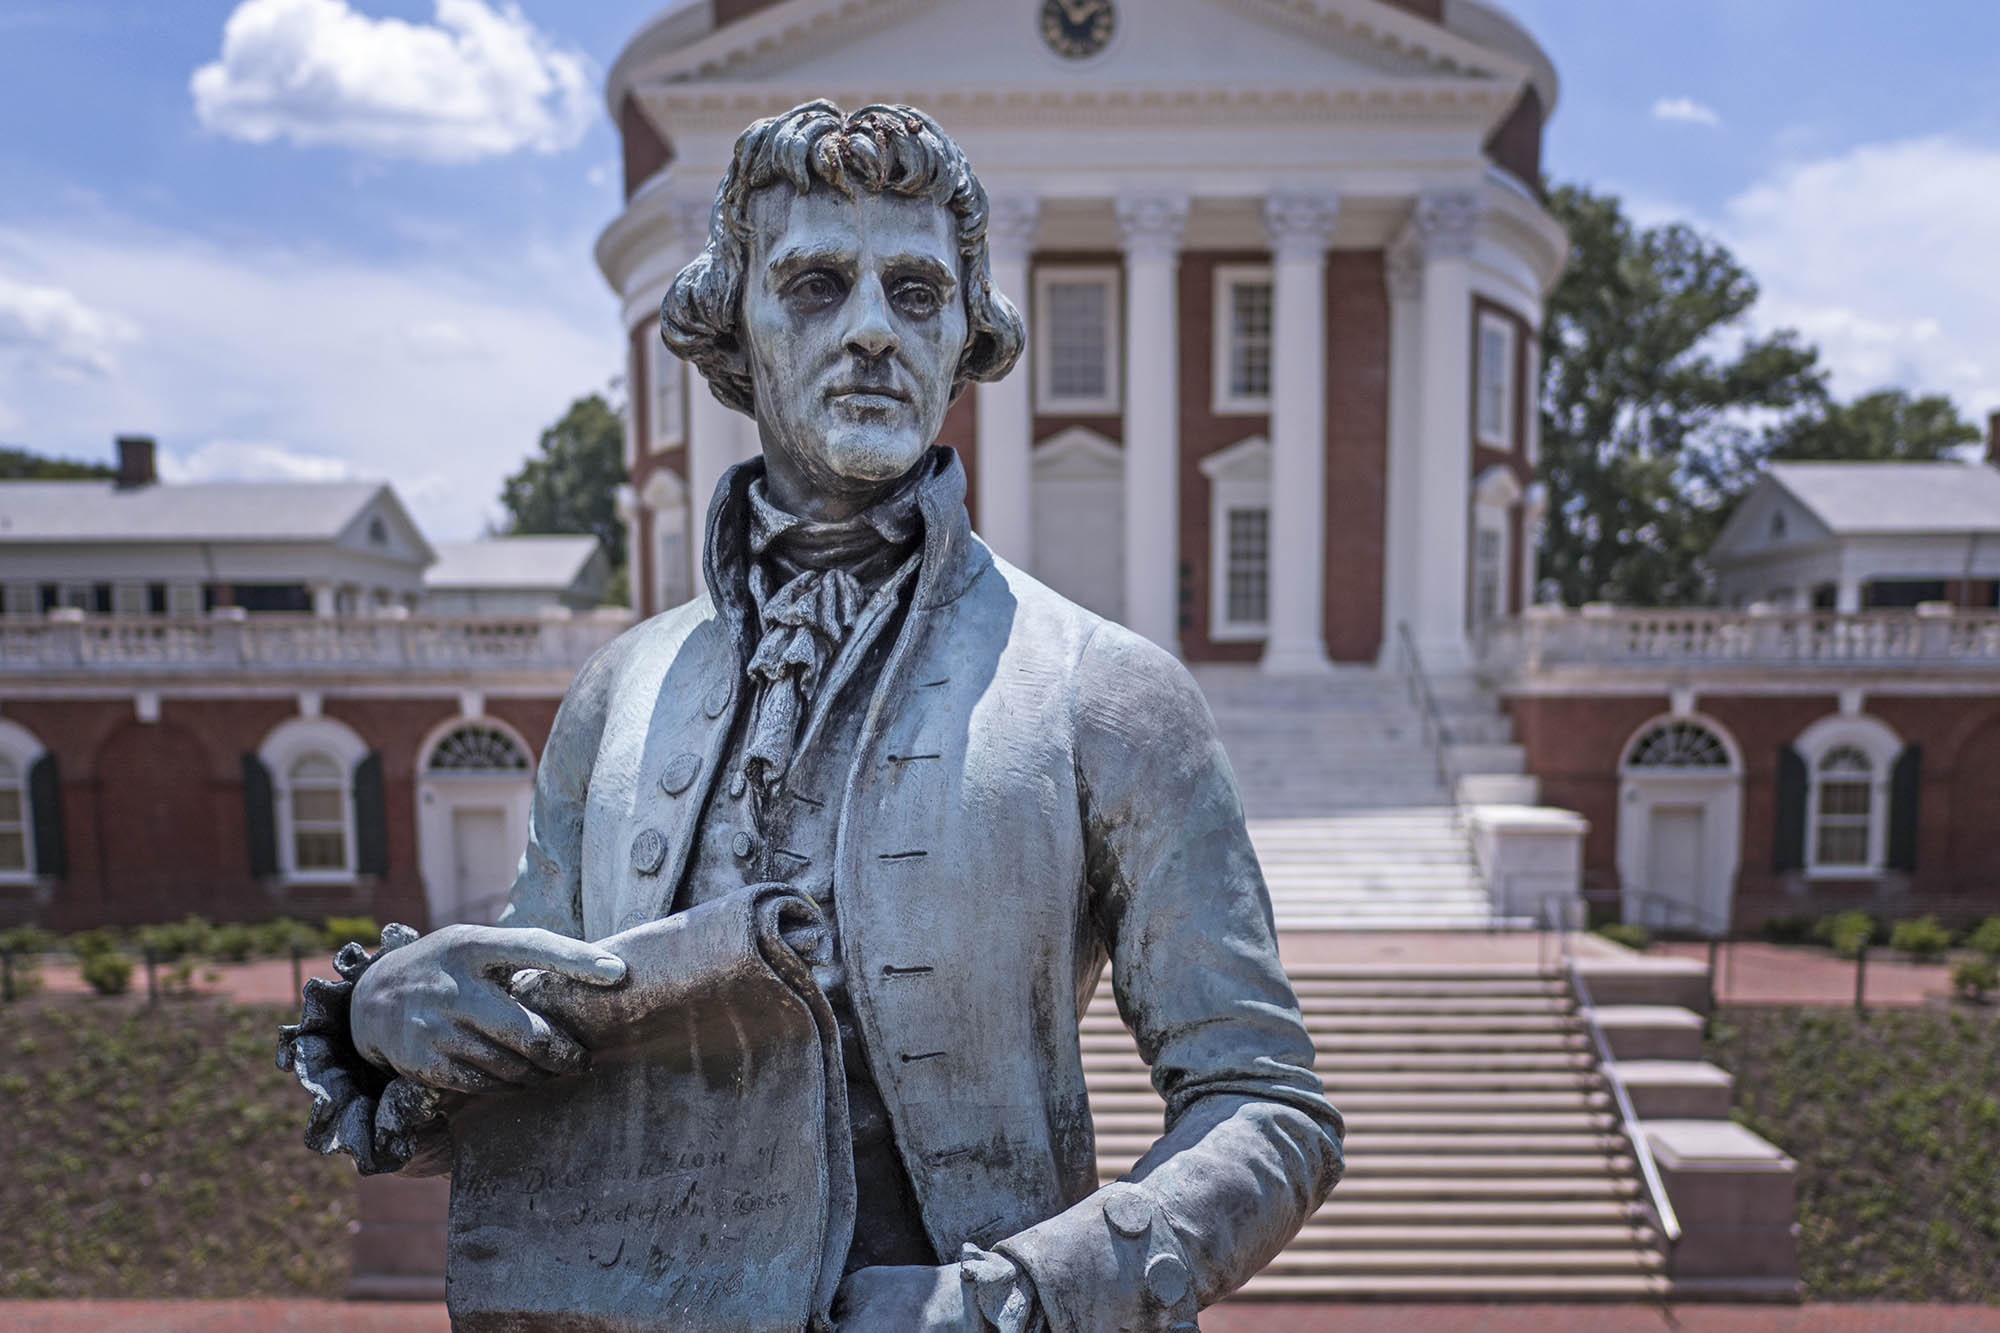 Up close view of the Thomas Jefferson Statue with the Rotunda behind him